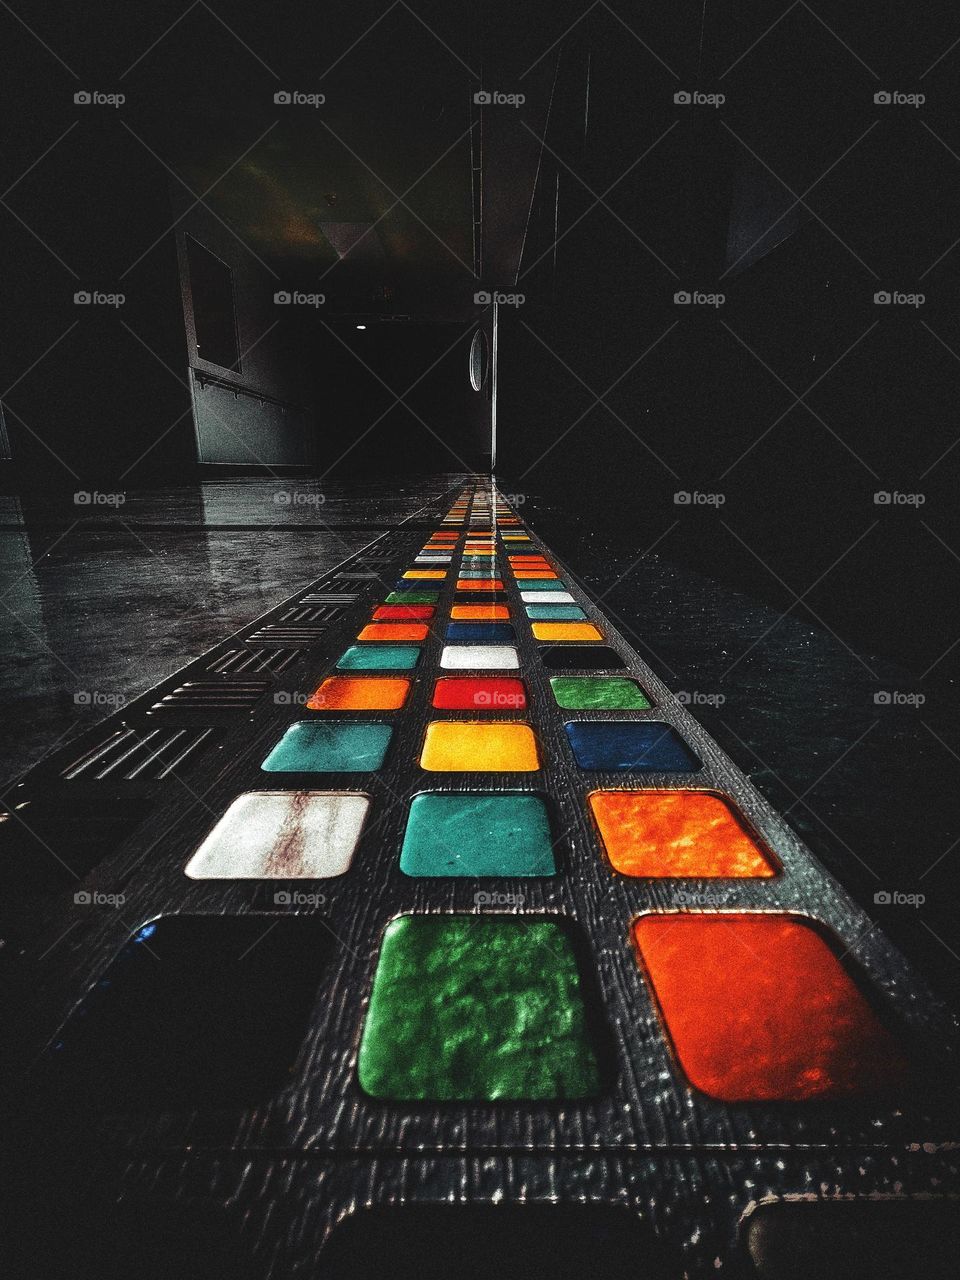 Floor ground level glass tile color colors colorful mood mood dark contrast square shape shot metal hospital design flooring tiles Perspective photo photography unique creative camera angle vantage point view dramatic effect positioning experiment